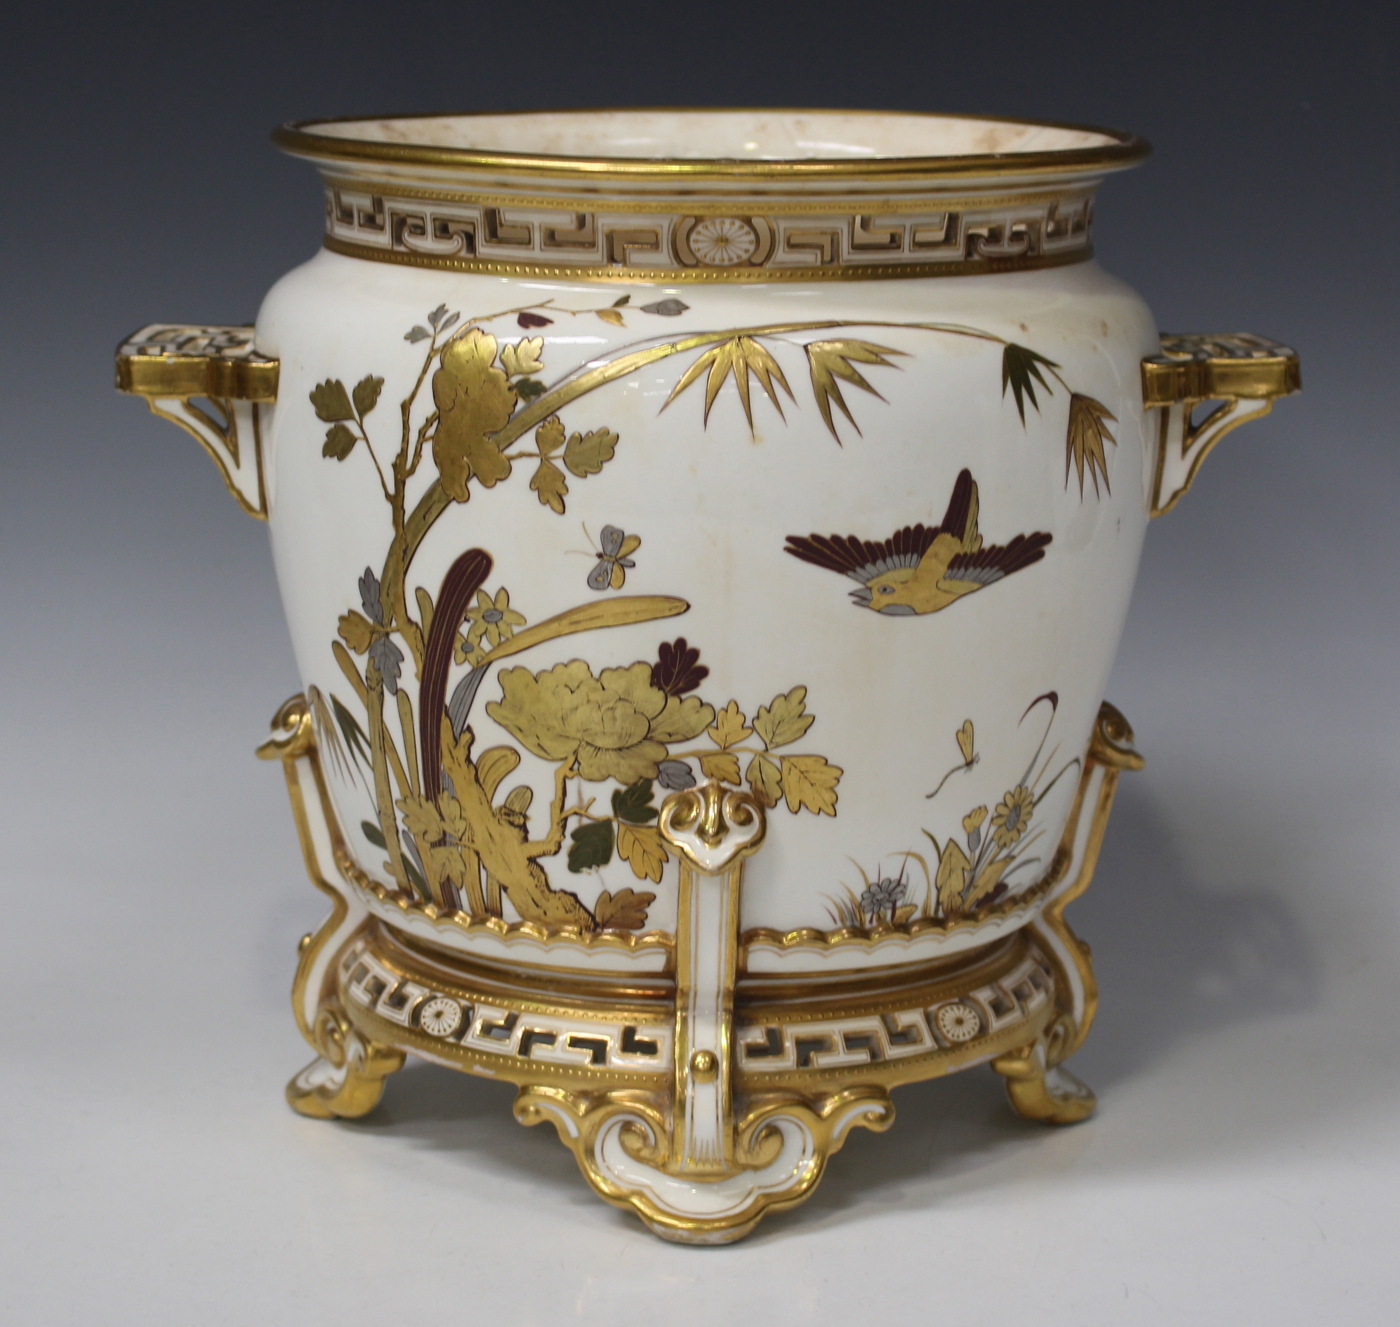 An aesthetic porcelain jardinière, late 19th century, possibly by Moore Brothers, of tapering